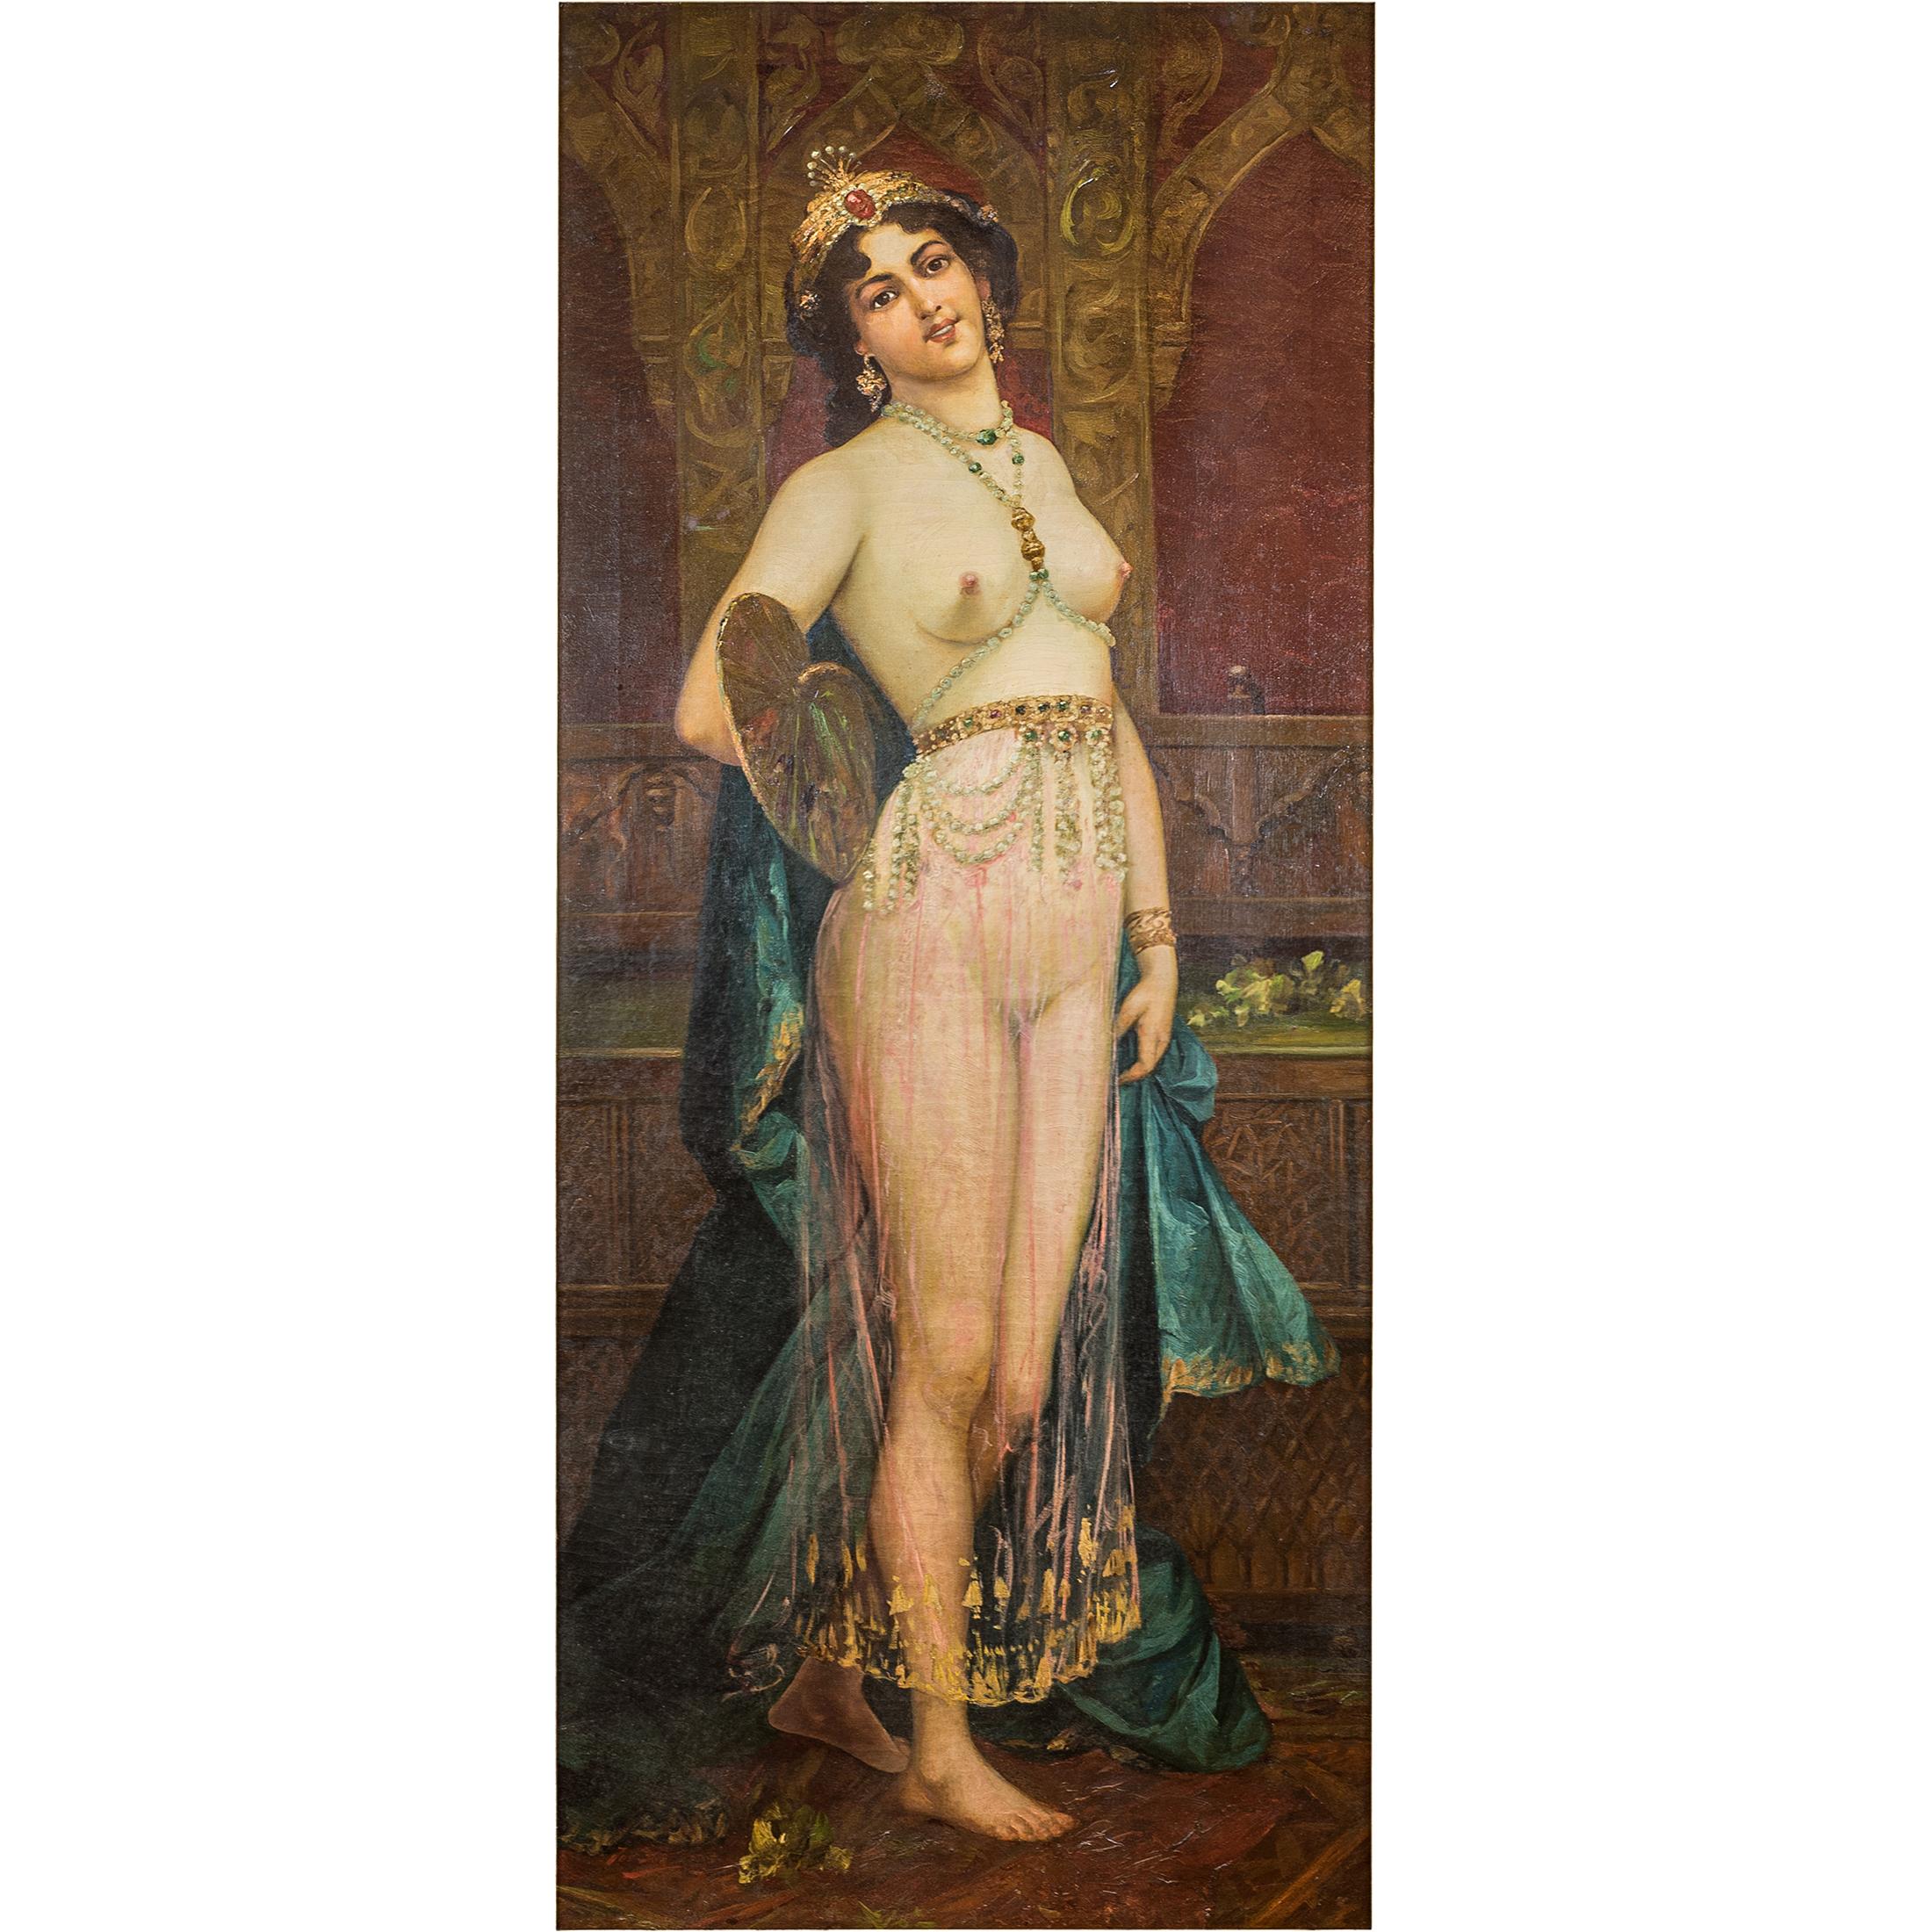 An original orientalist painting of a beautiful half nude odalisque holding a fan. Signed L/L illegible.

Date: 19th century
Origin: French
Medium: Oil on canvas
Dimension: 51 in. x 21 3/4 in.; (framed) 61 1/2 in. x 32 1/4 in.